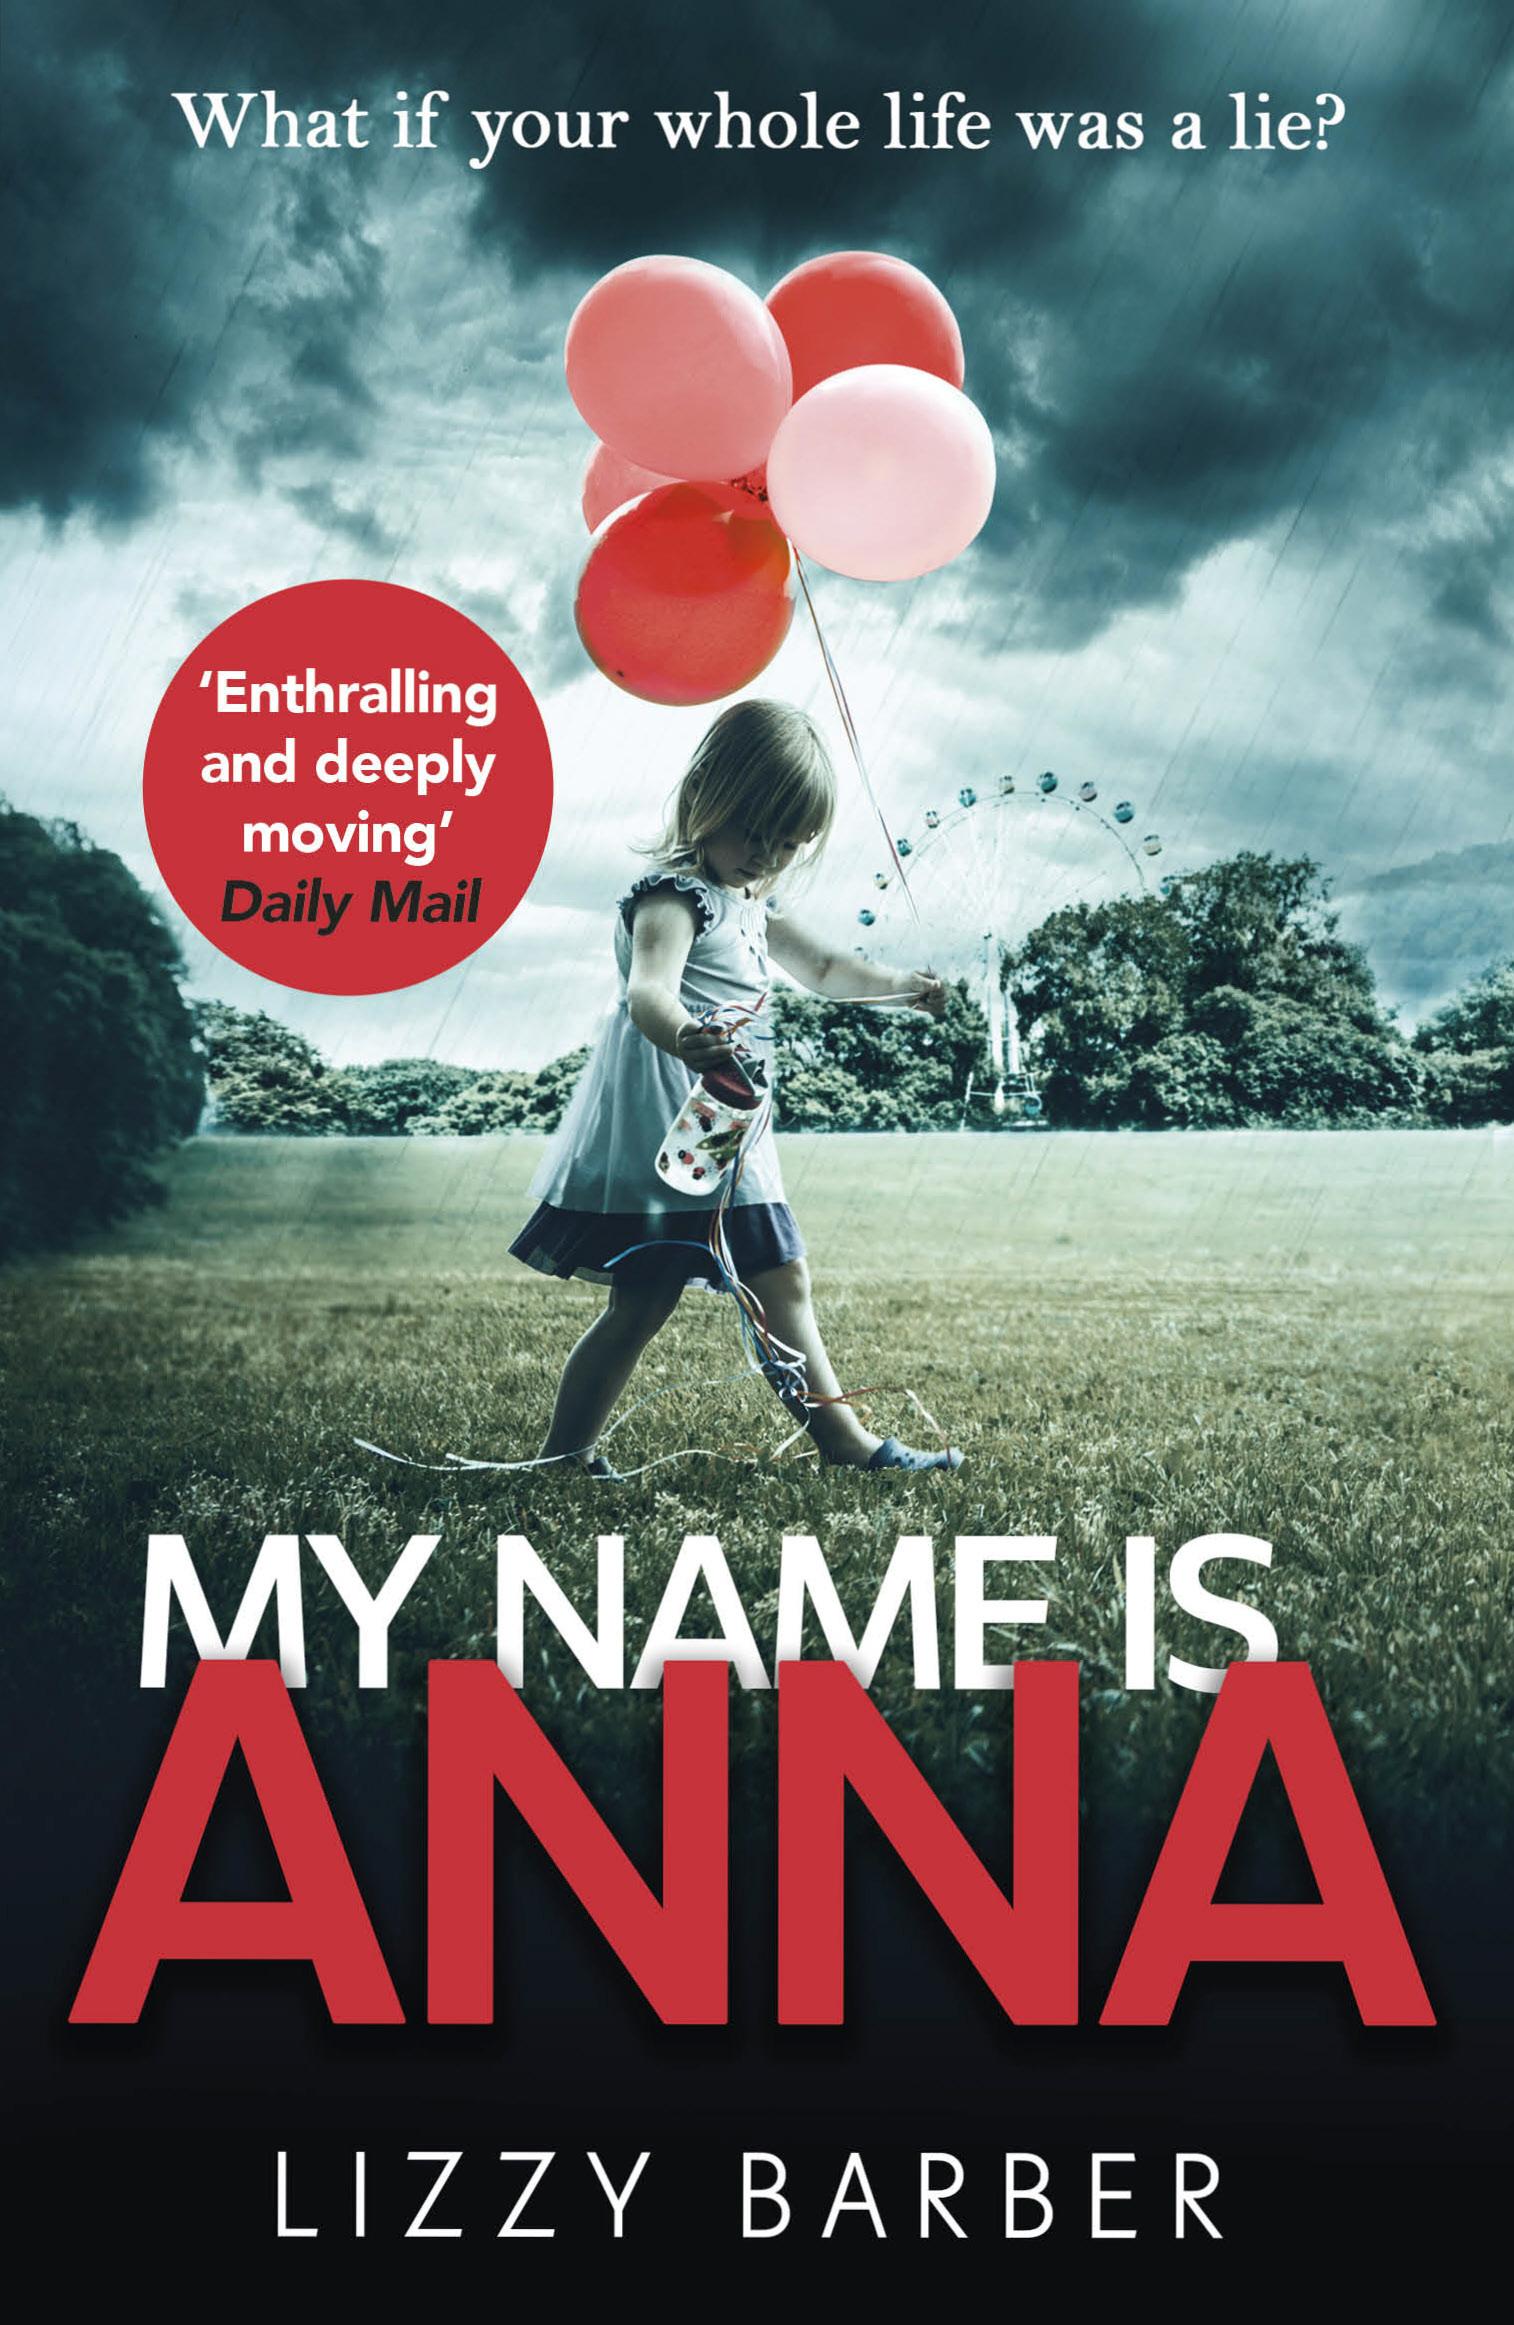 My Name is Anna - Lizzy Barber